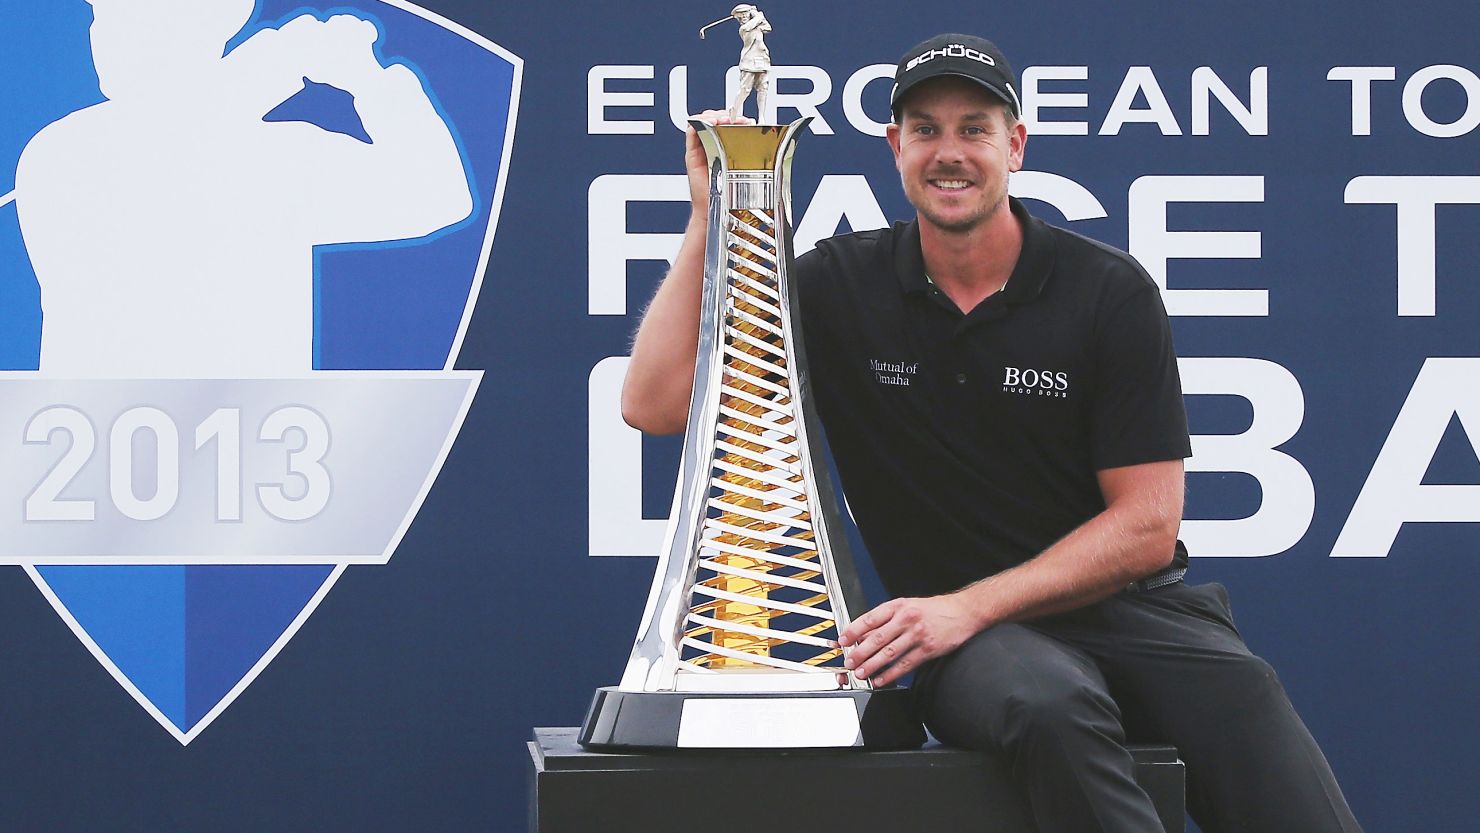 Henrk Stenson with the spoils of his victory at the World Tour championship in Dubai after a stunning last day display, 